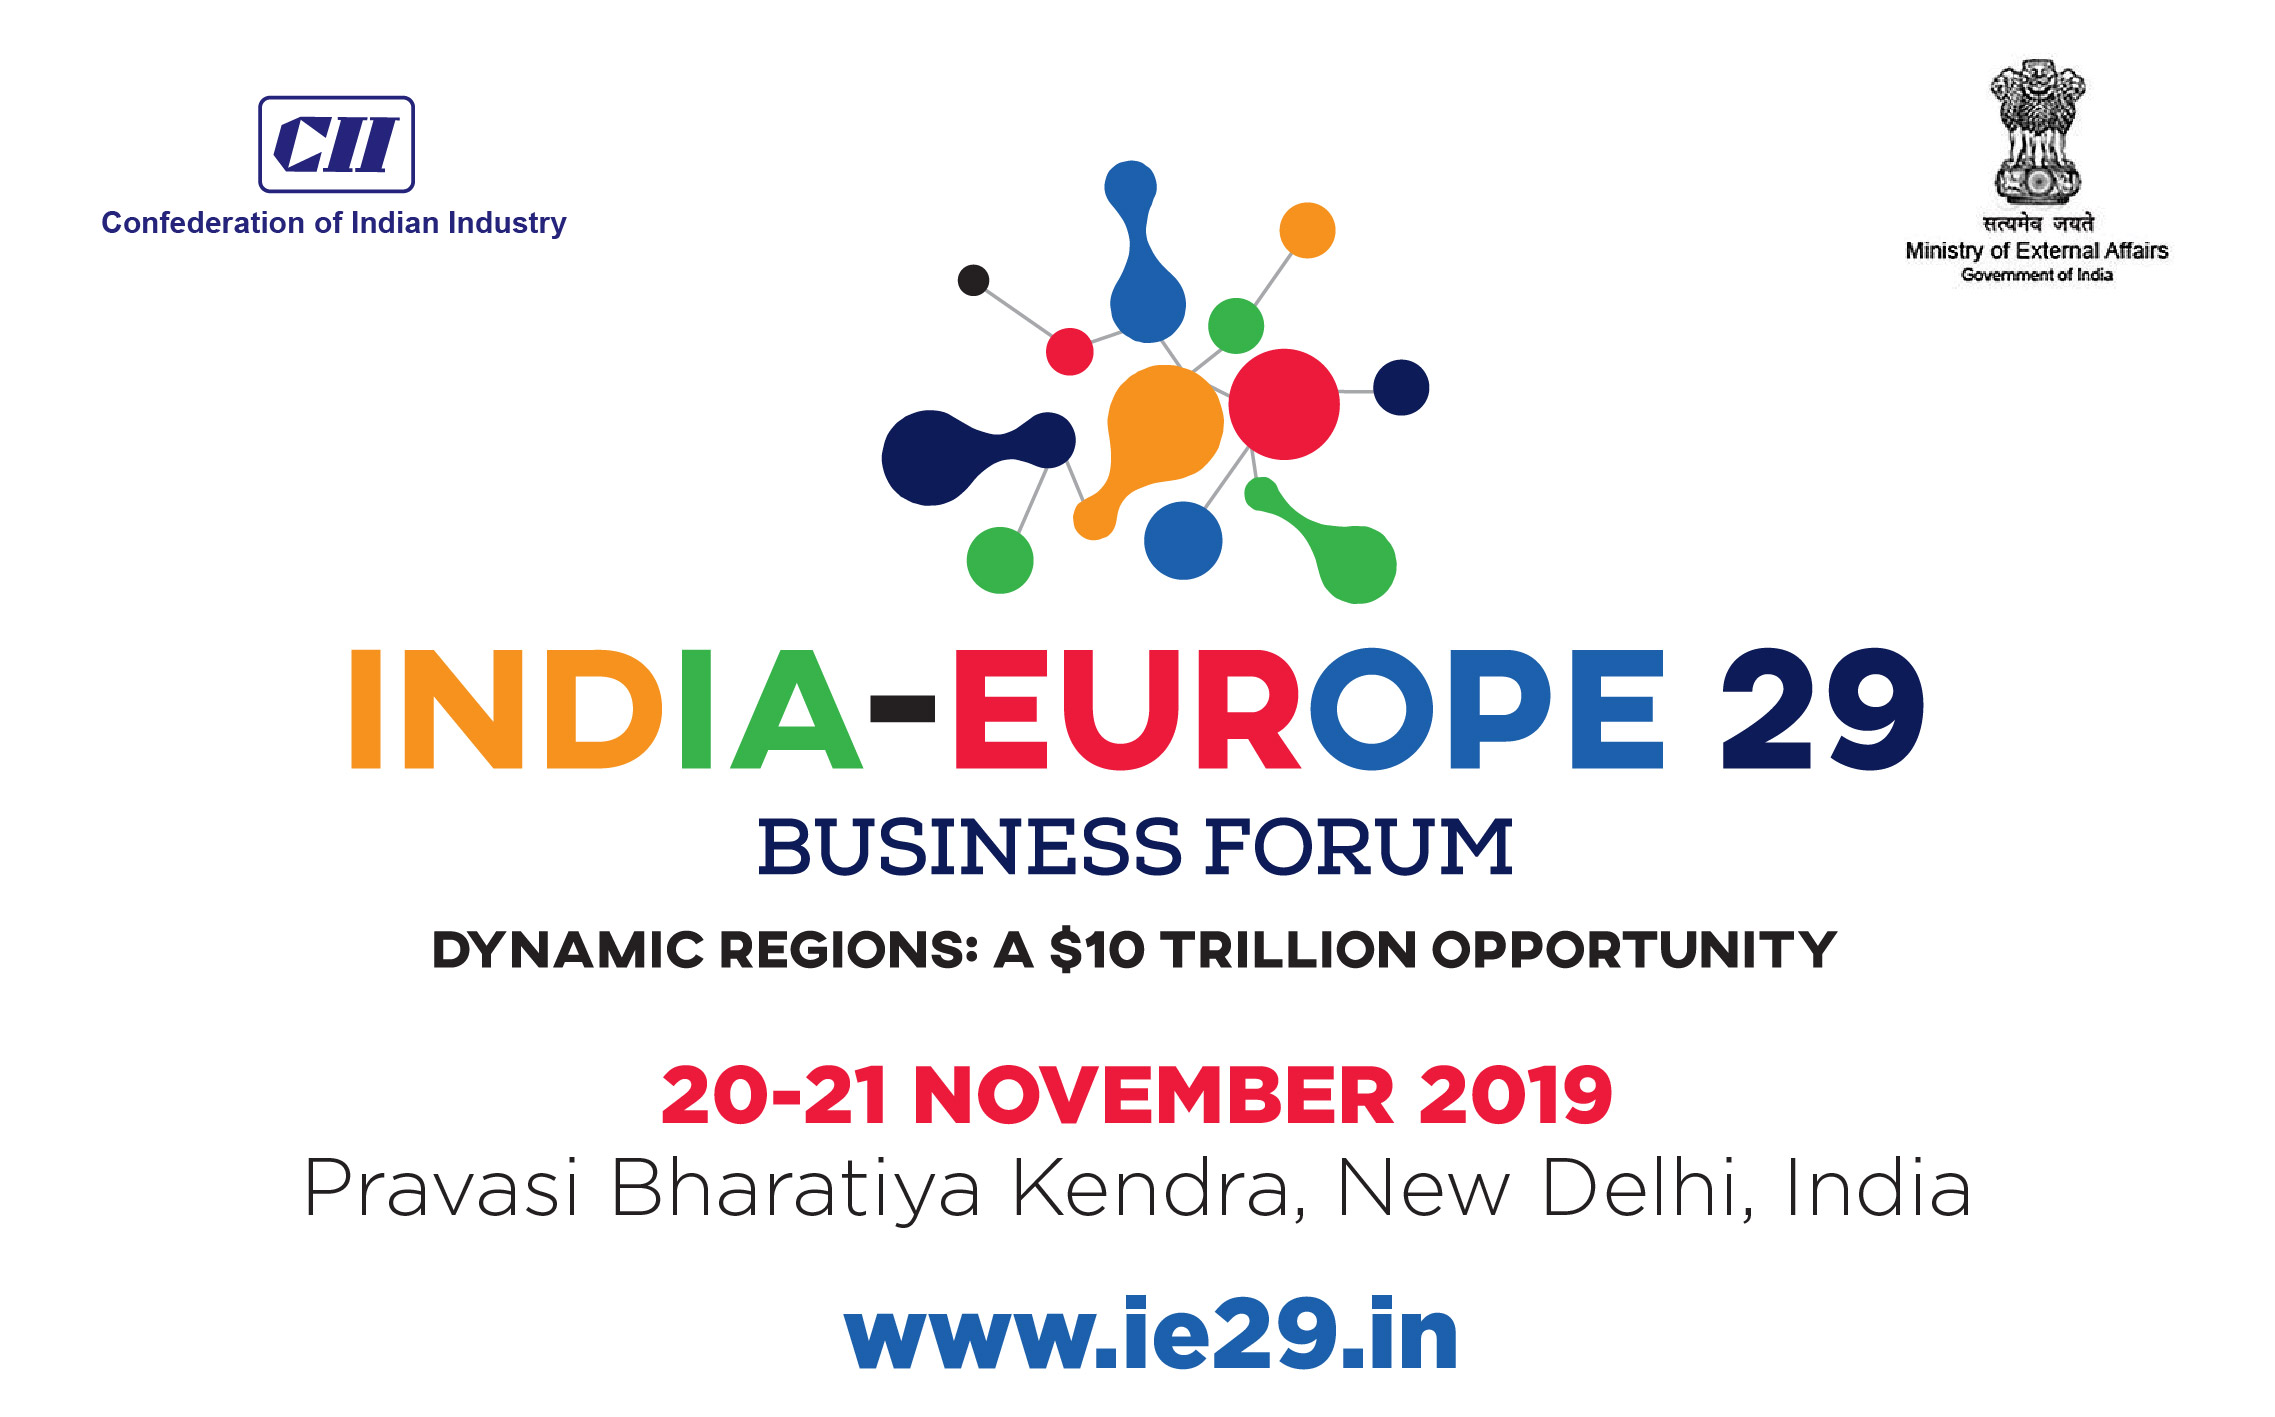 The 5th edition of the India-Europe 29 Business Forum (IE29BF), from 20th to 21st November 2019, New Delhi